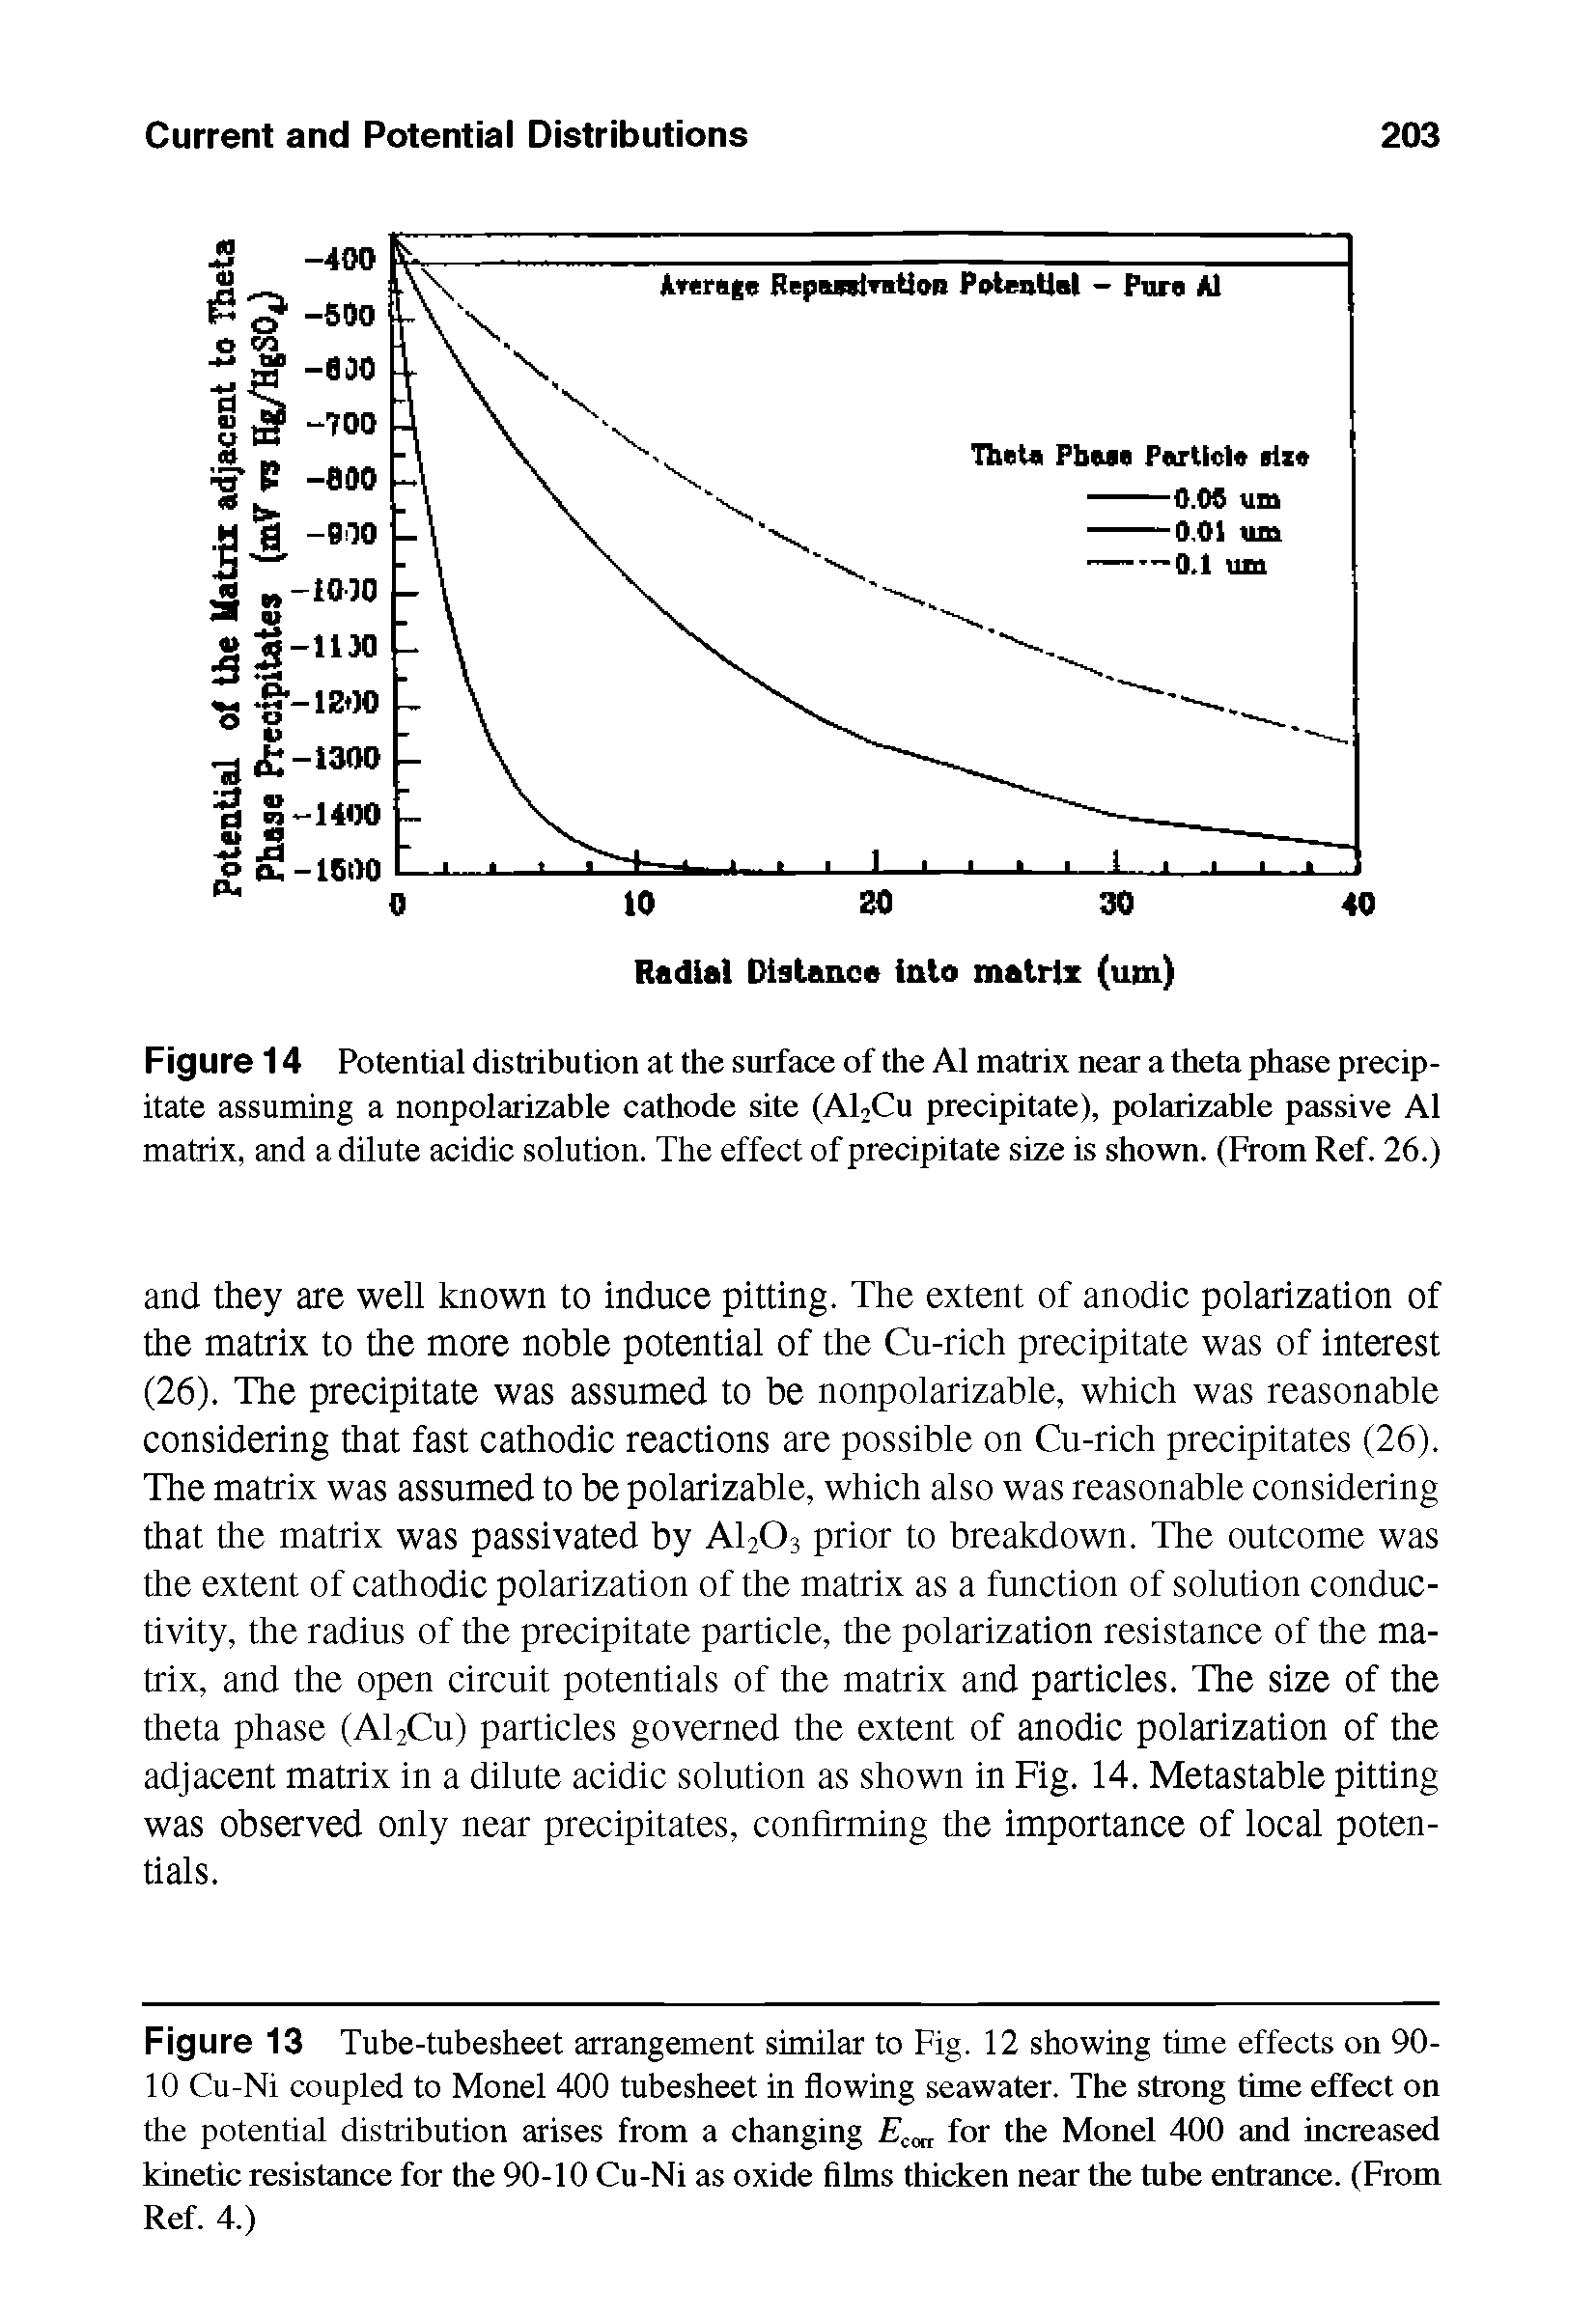 Figure 13 Tube-tubesheet arrangement similar to Fig. 12 showing time effects on 90-10 Cu-Ni coupled to Monel 400 tubesheet in flowing seawater. The strong time effect on the potential distribution arises from a changing Ecxt for the Monel 400 and increased kinetic resistance for the 90-10 Cu-Ni as oxide films thicken near the tube entrance. (From Ref. 4.)...